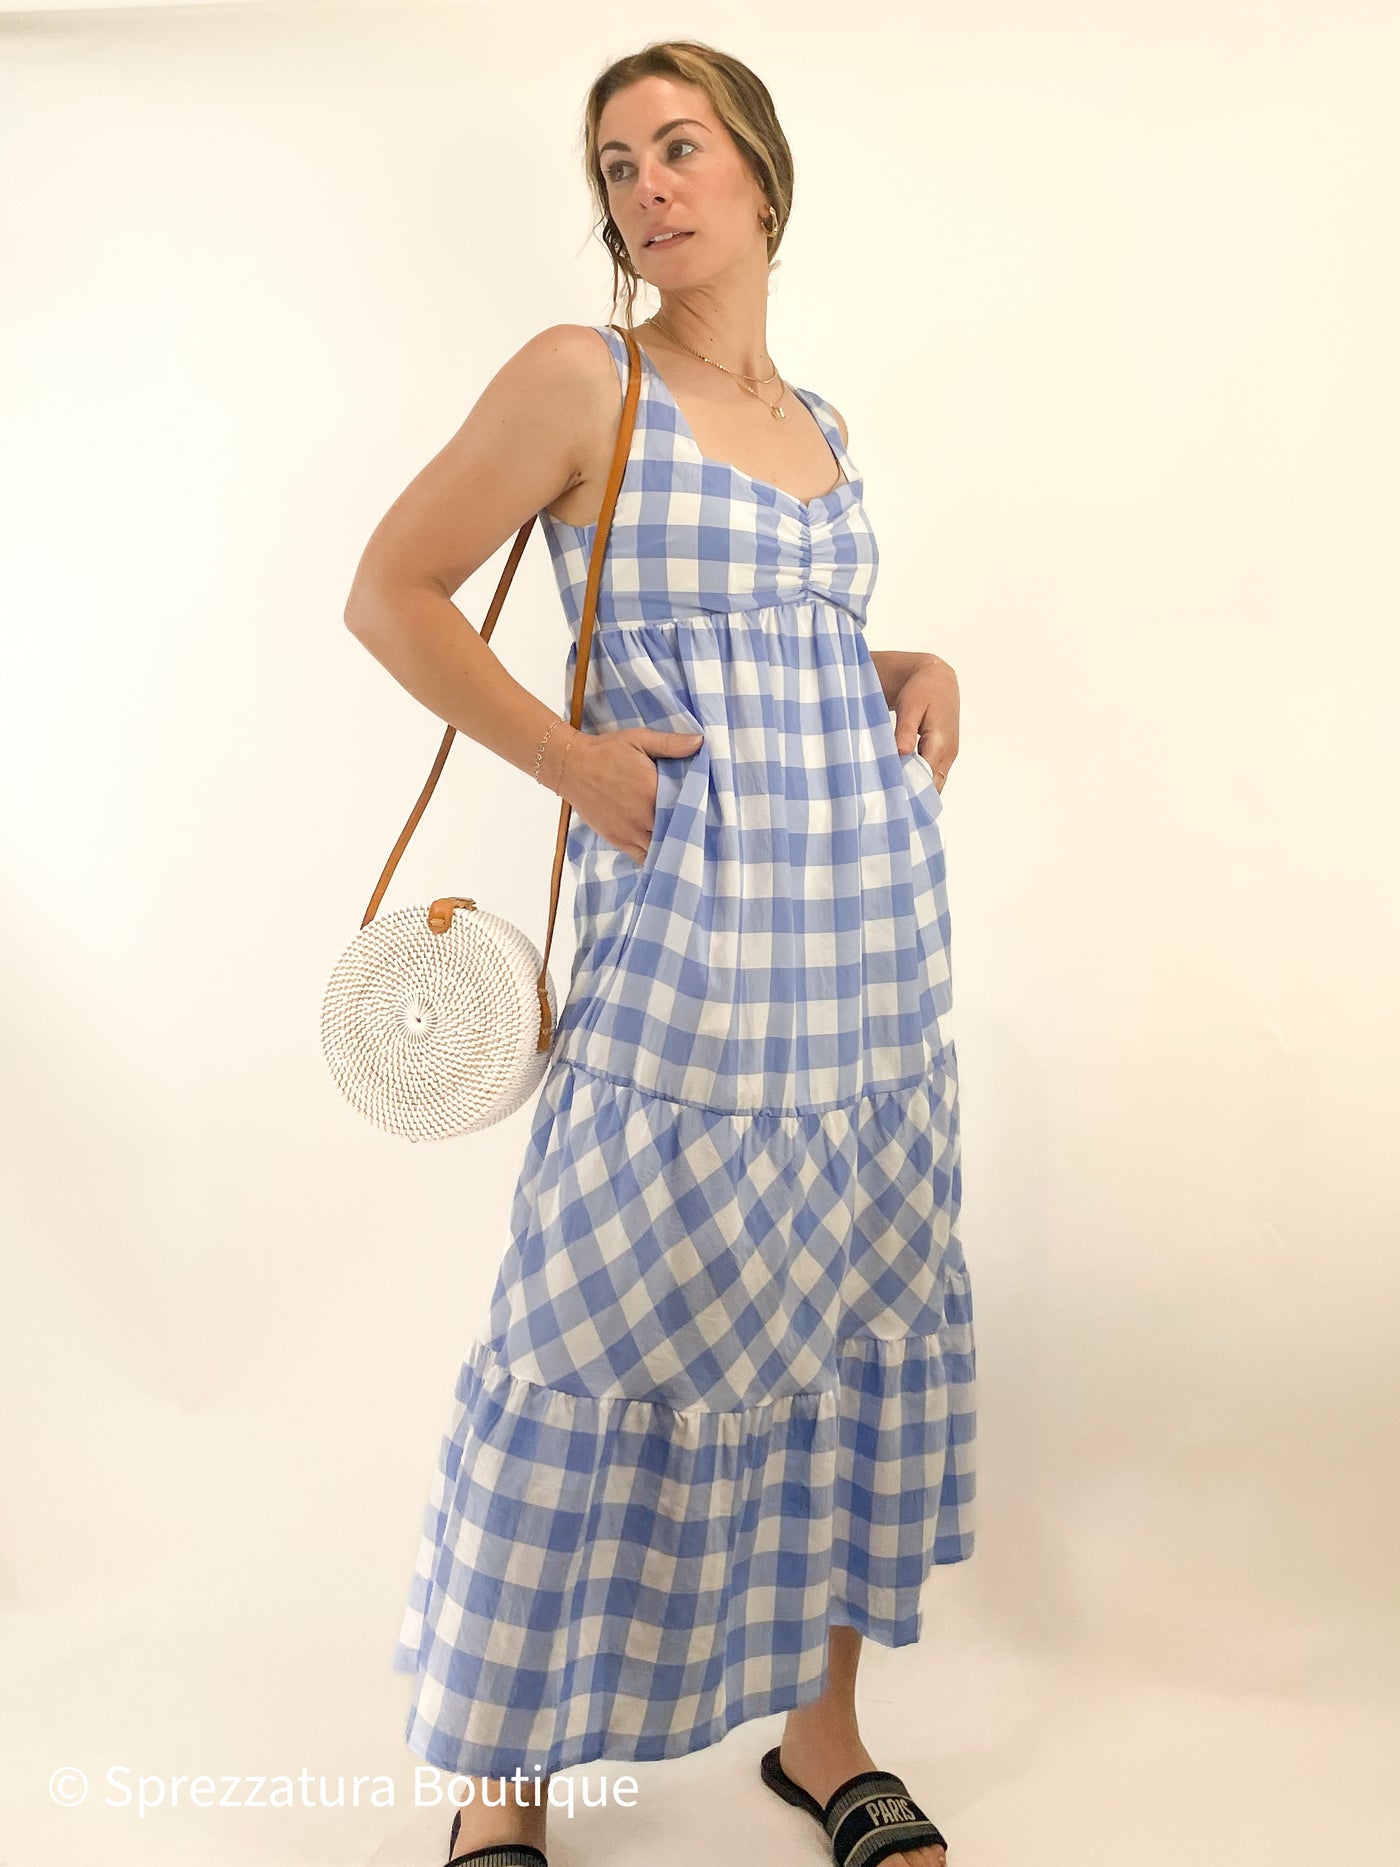 Blue white gingham checker dress empire maxi pockets chic casual lightweight everyday mom office work attire professional teacher comfortable Modern smart causal female chic effortless outfit womens ladies gift elegant effortless clothing everyday stylish clothes apparel outfits chic winter summer style women’s boutique trendy teacher office cute outfit boutique clothes fashion quality work from home coastal beachy neutral wardrobe essential basics gift for her